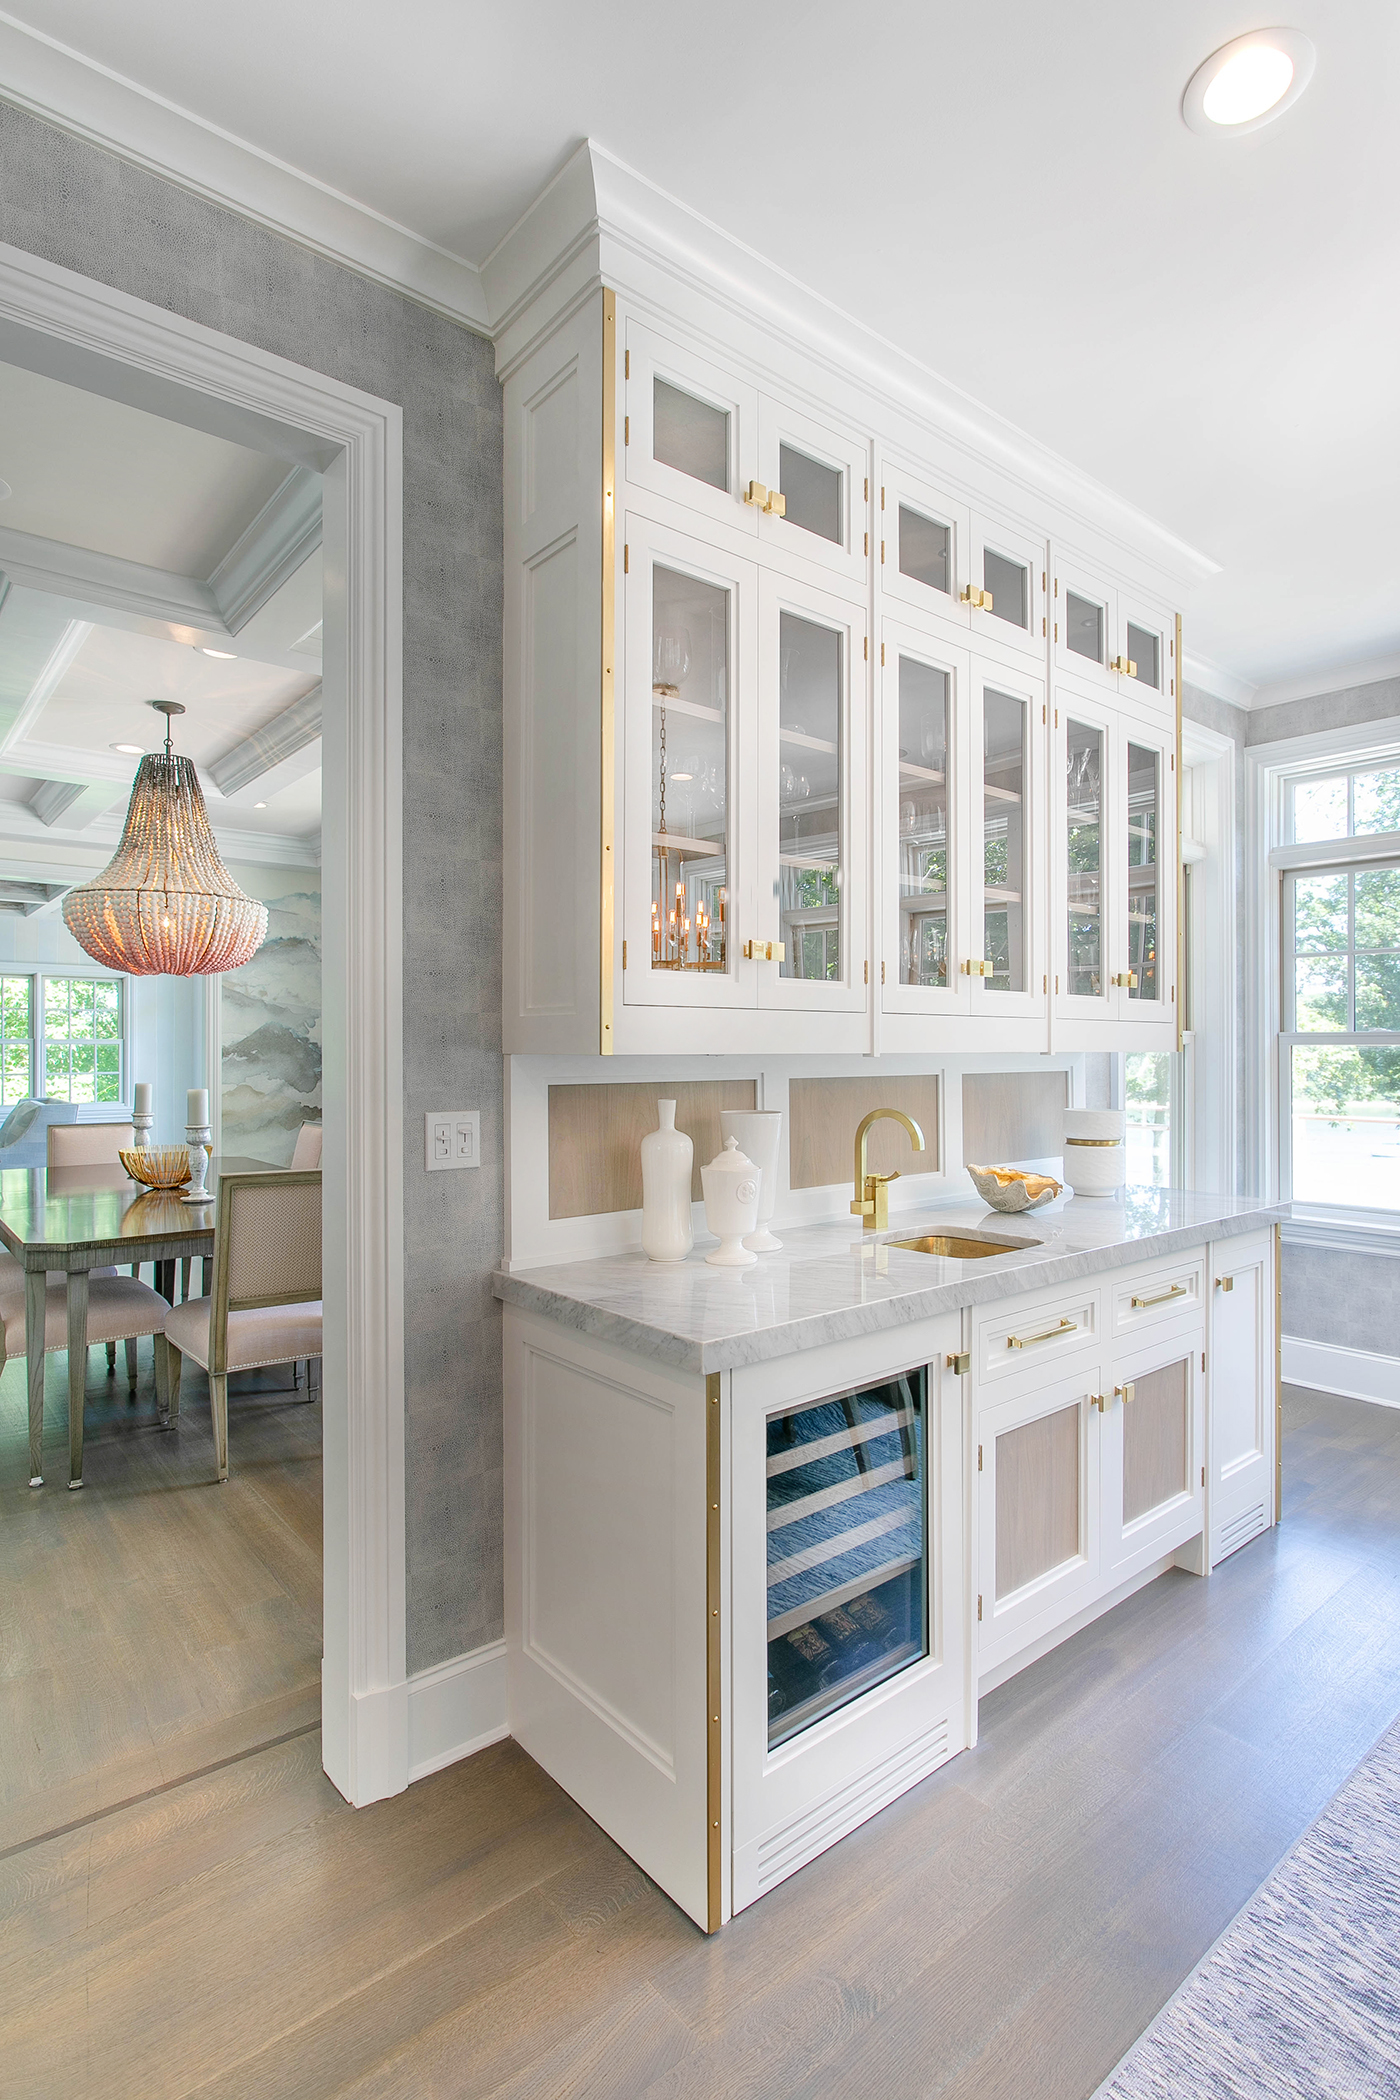 Kitchen designed by Bakes & Kropp in collaboration with Diane Guariglia of Dyfari Interiors. COURTESY BAKES & KROPP